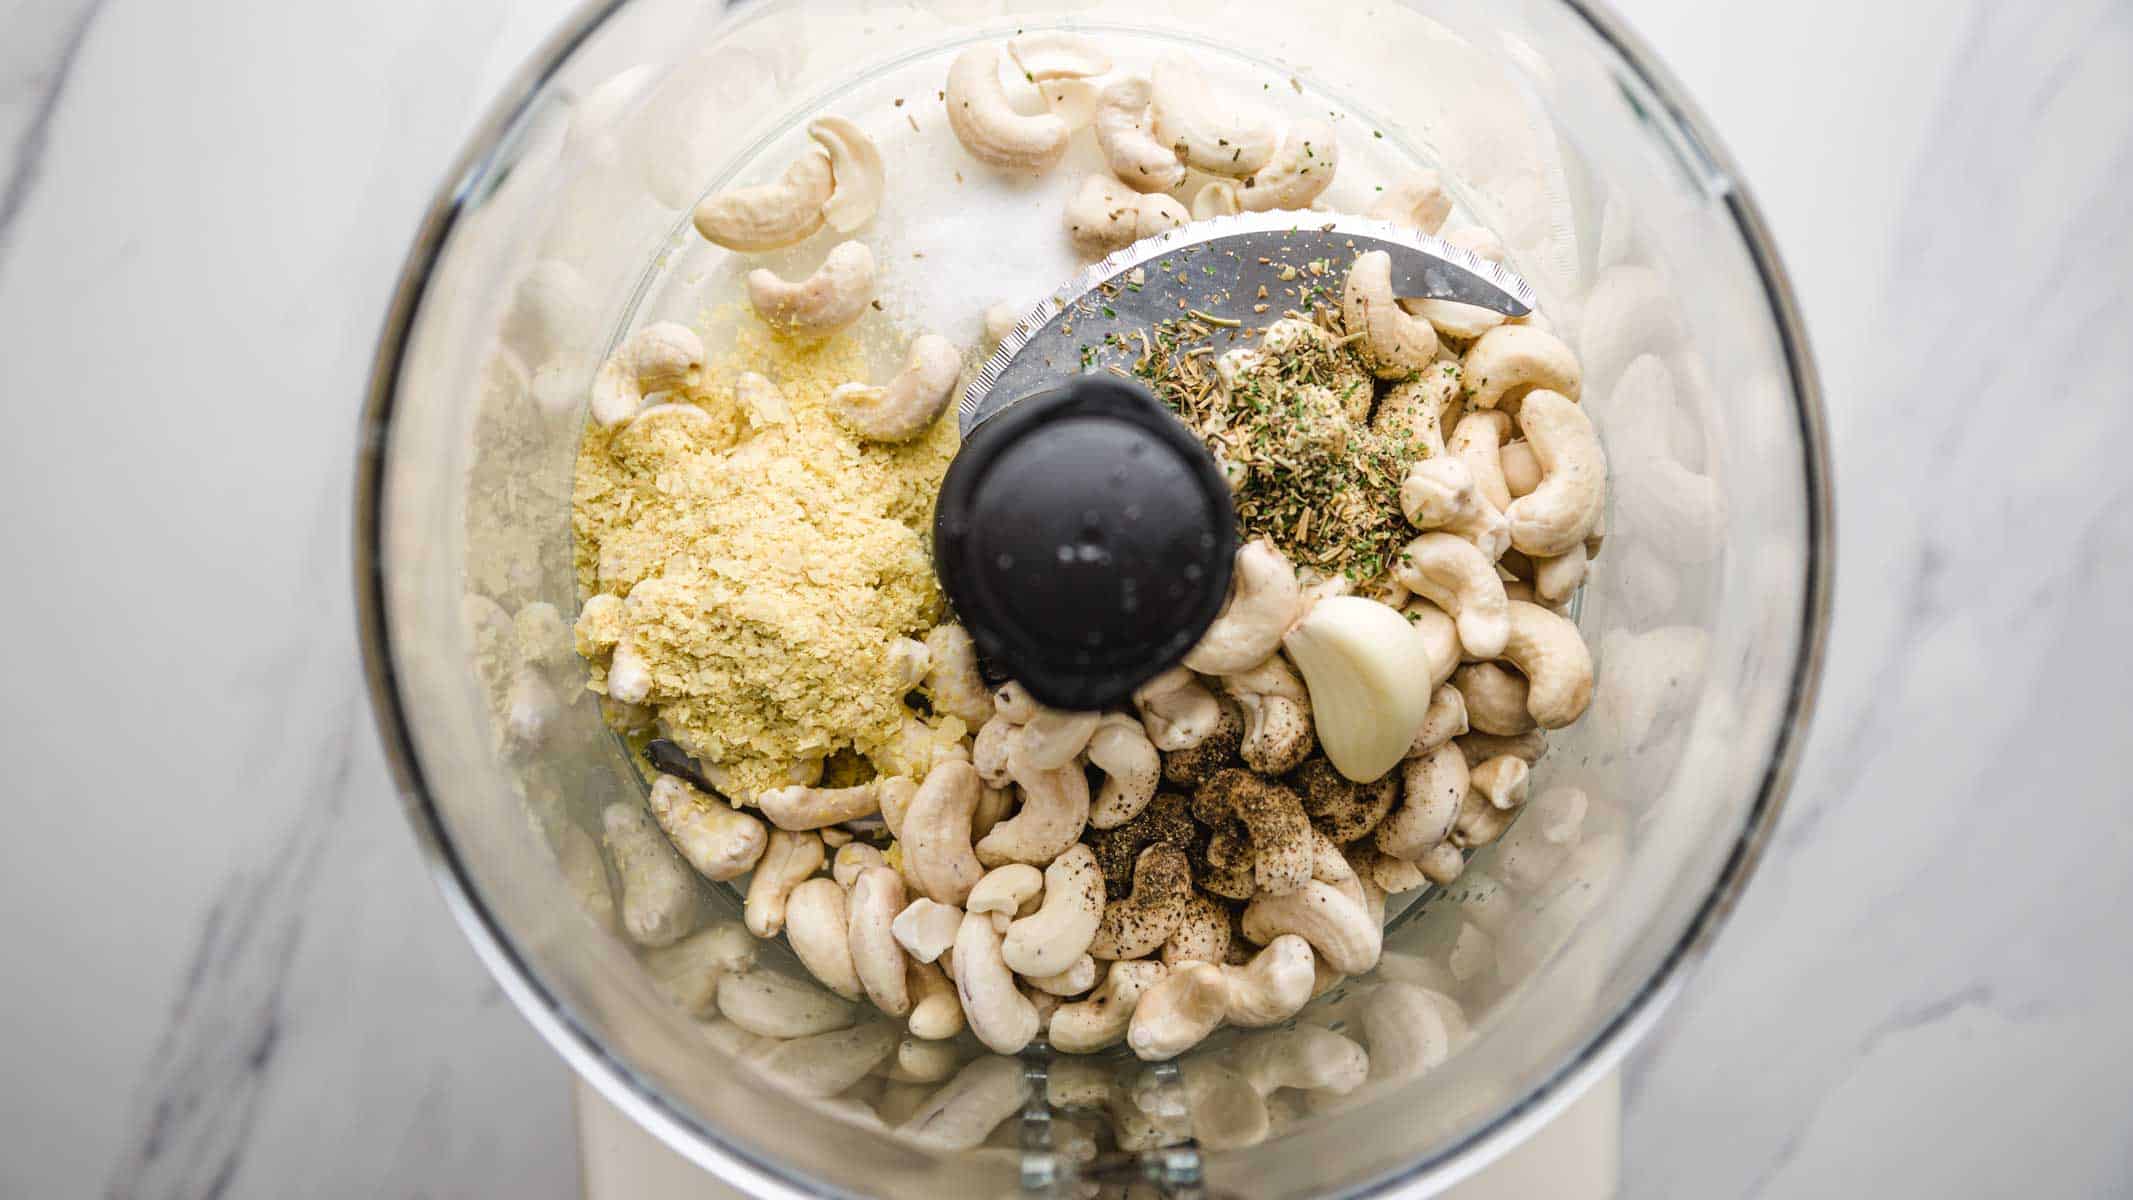 The ingredients in a food processor